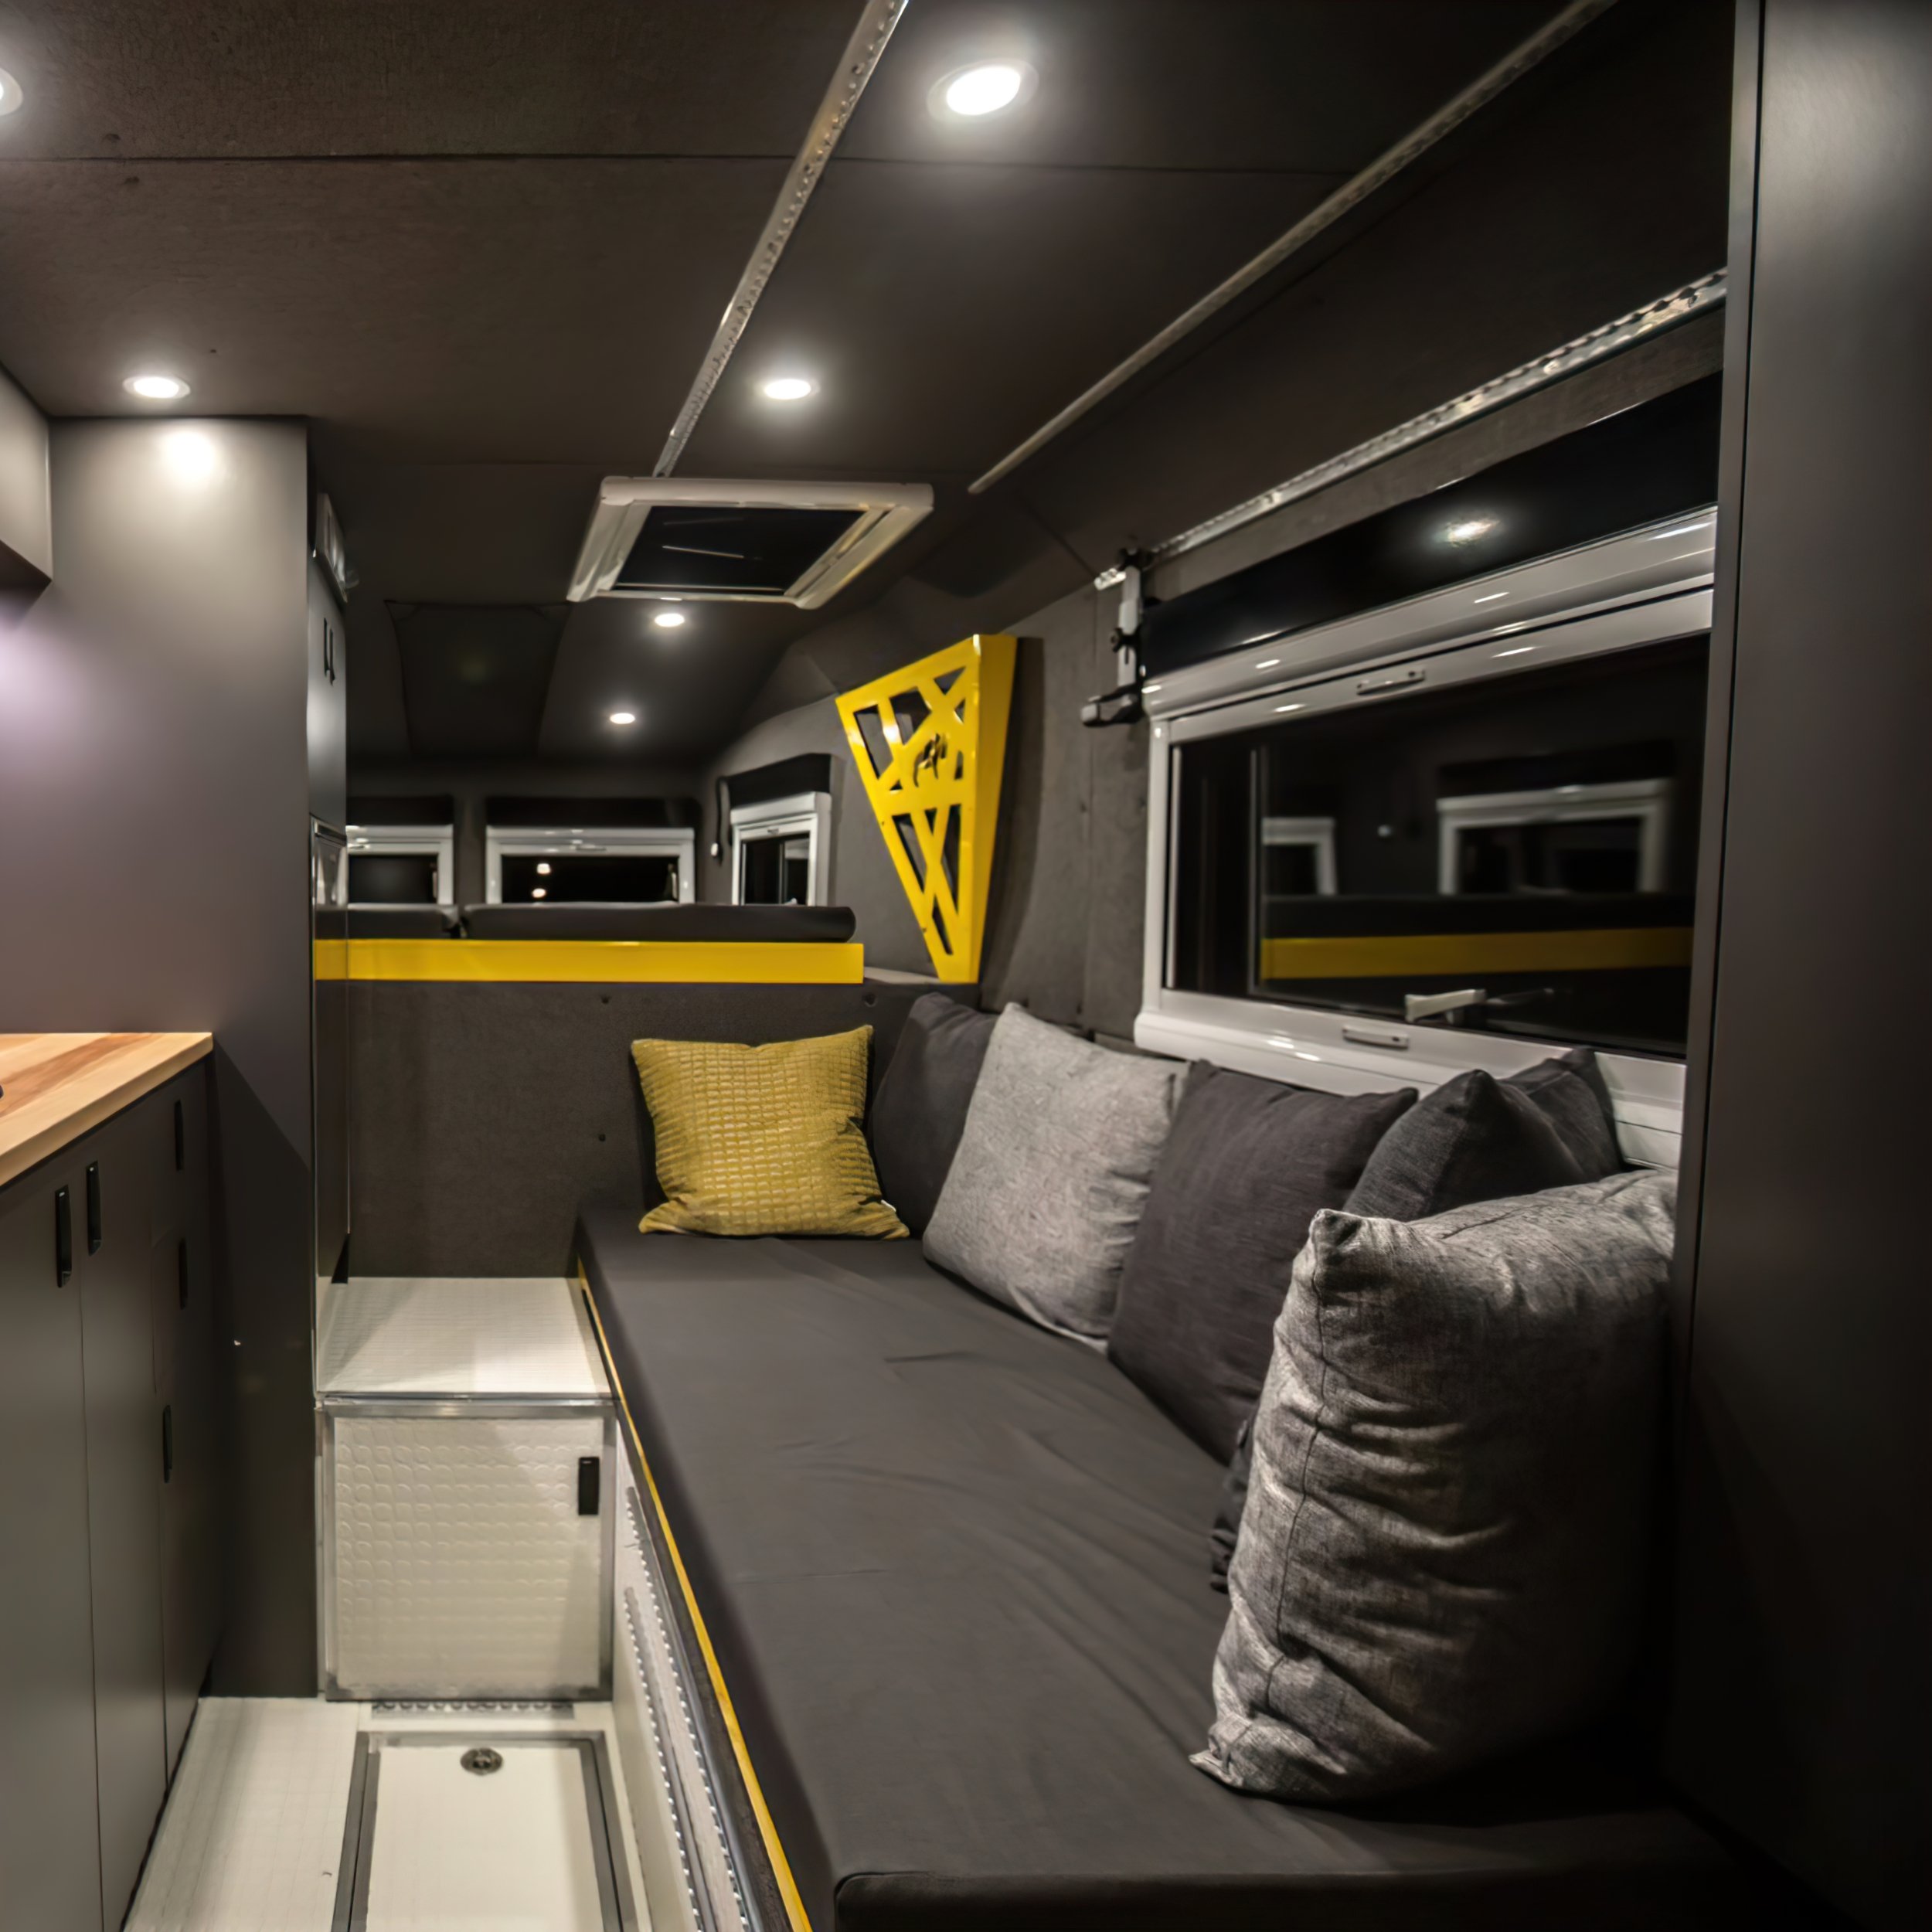  Beside that is the kitchenette, with a portable induction cooktop, fridge, and countertop space. Space isn’t an issue, with three storage cabinets and storage pockets.  The over-cabin sleeping area is large enough for a queen-sized bed with USBs a-p